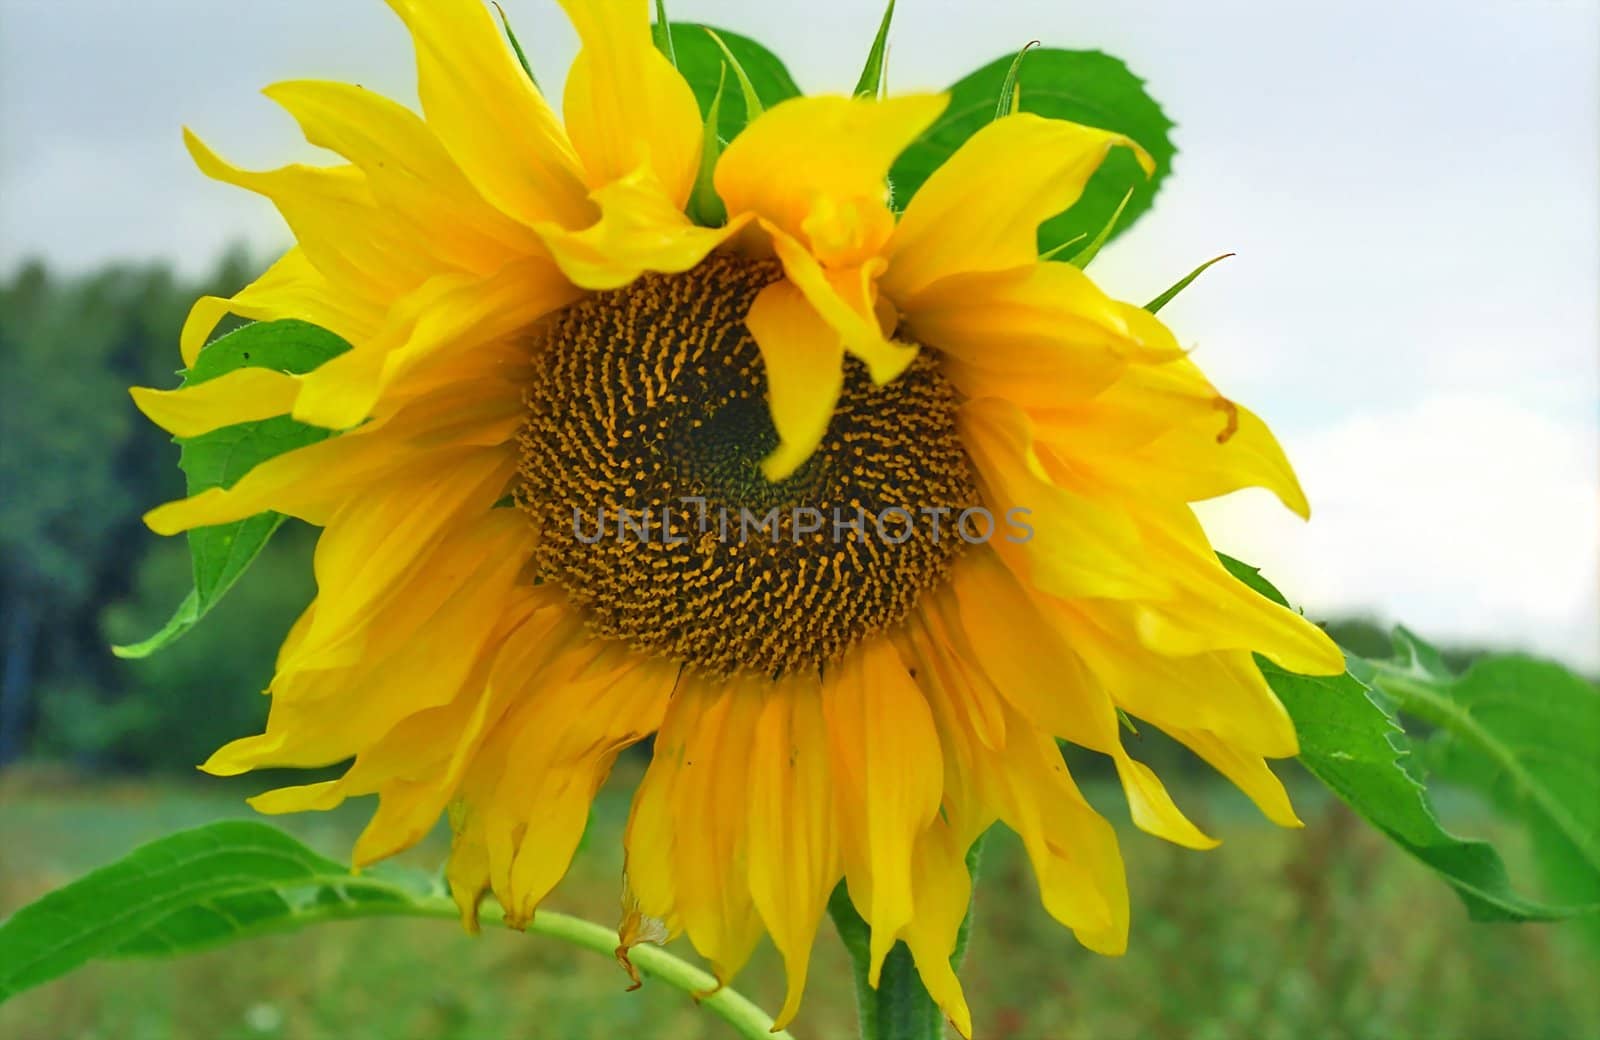 Sunflower close-up by mulden